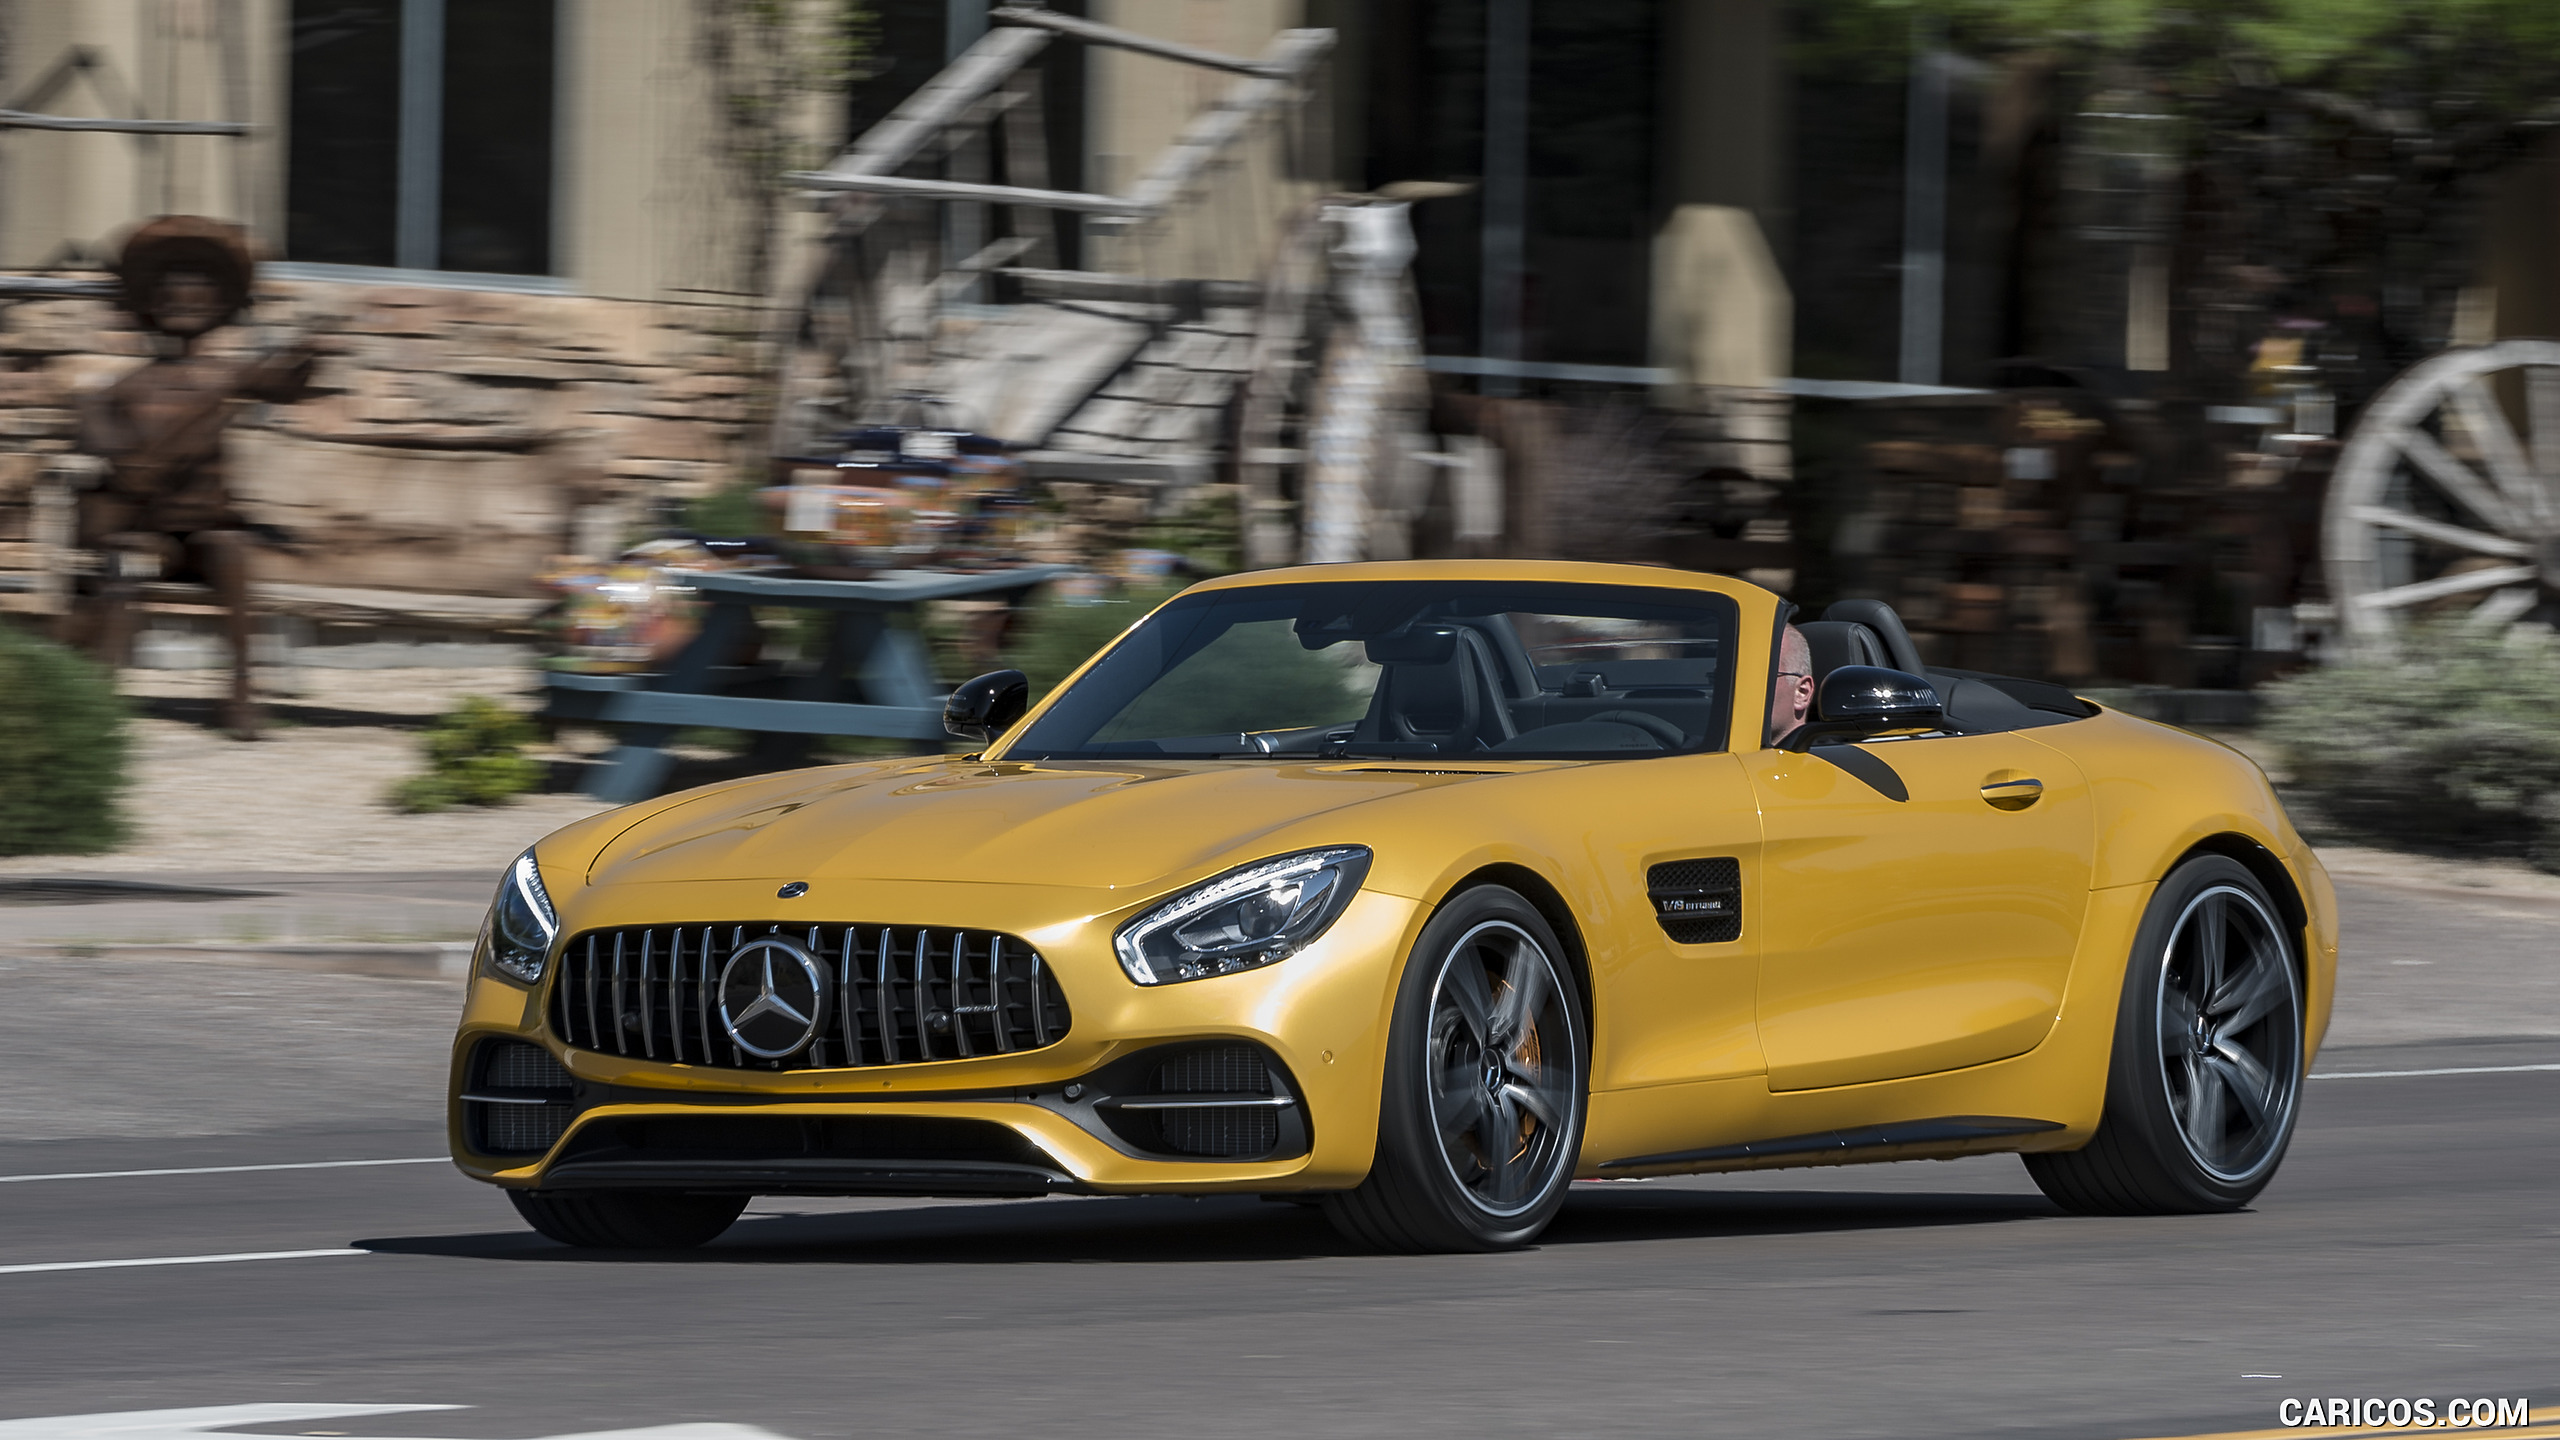 2018 Mercedes-AMG GT C Roadster - Front Three-Quarter, #234 of 350